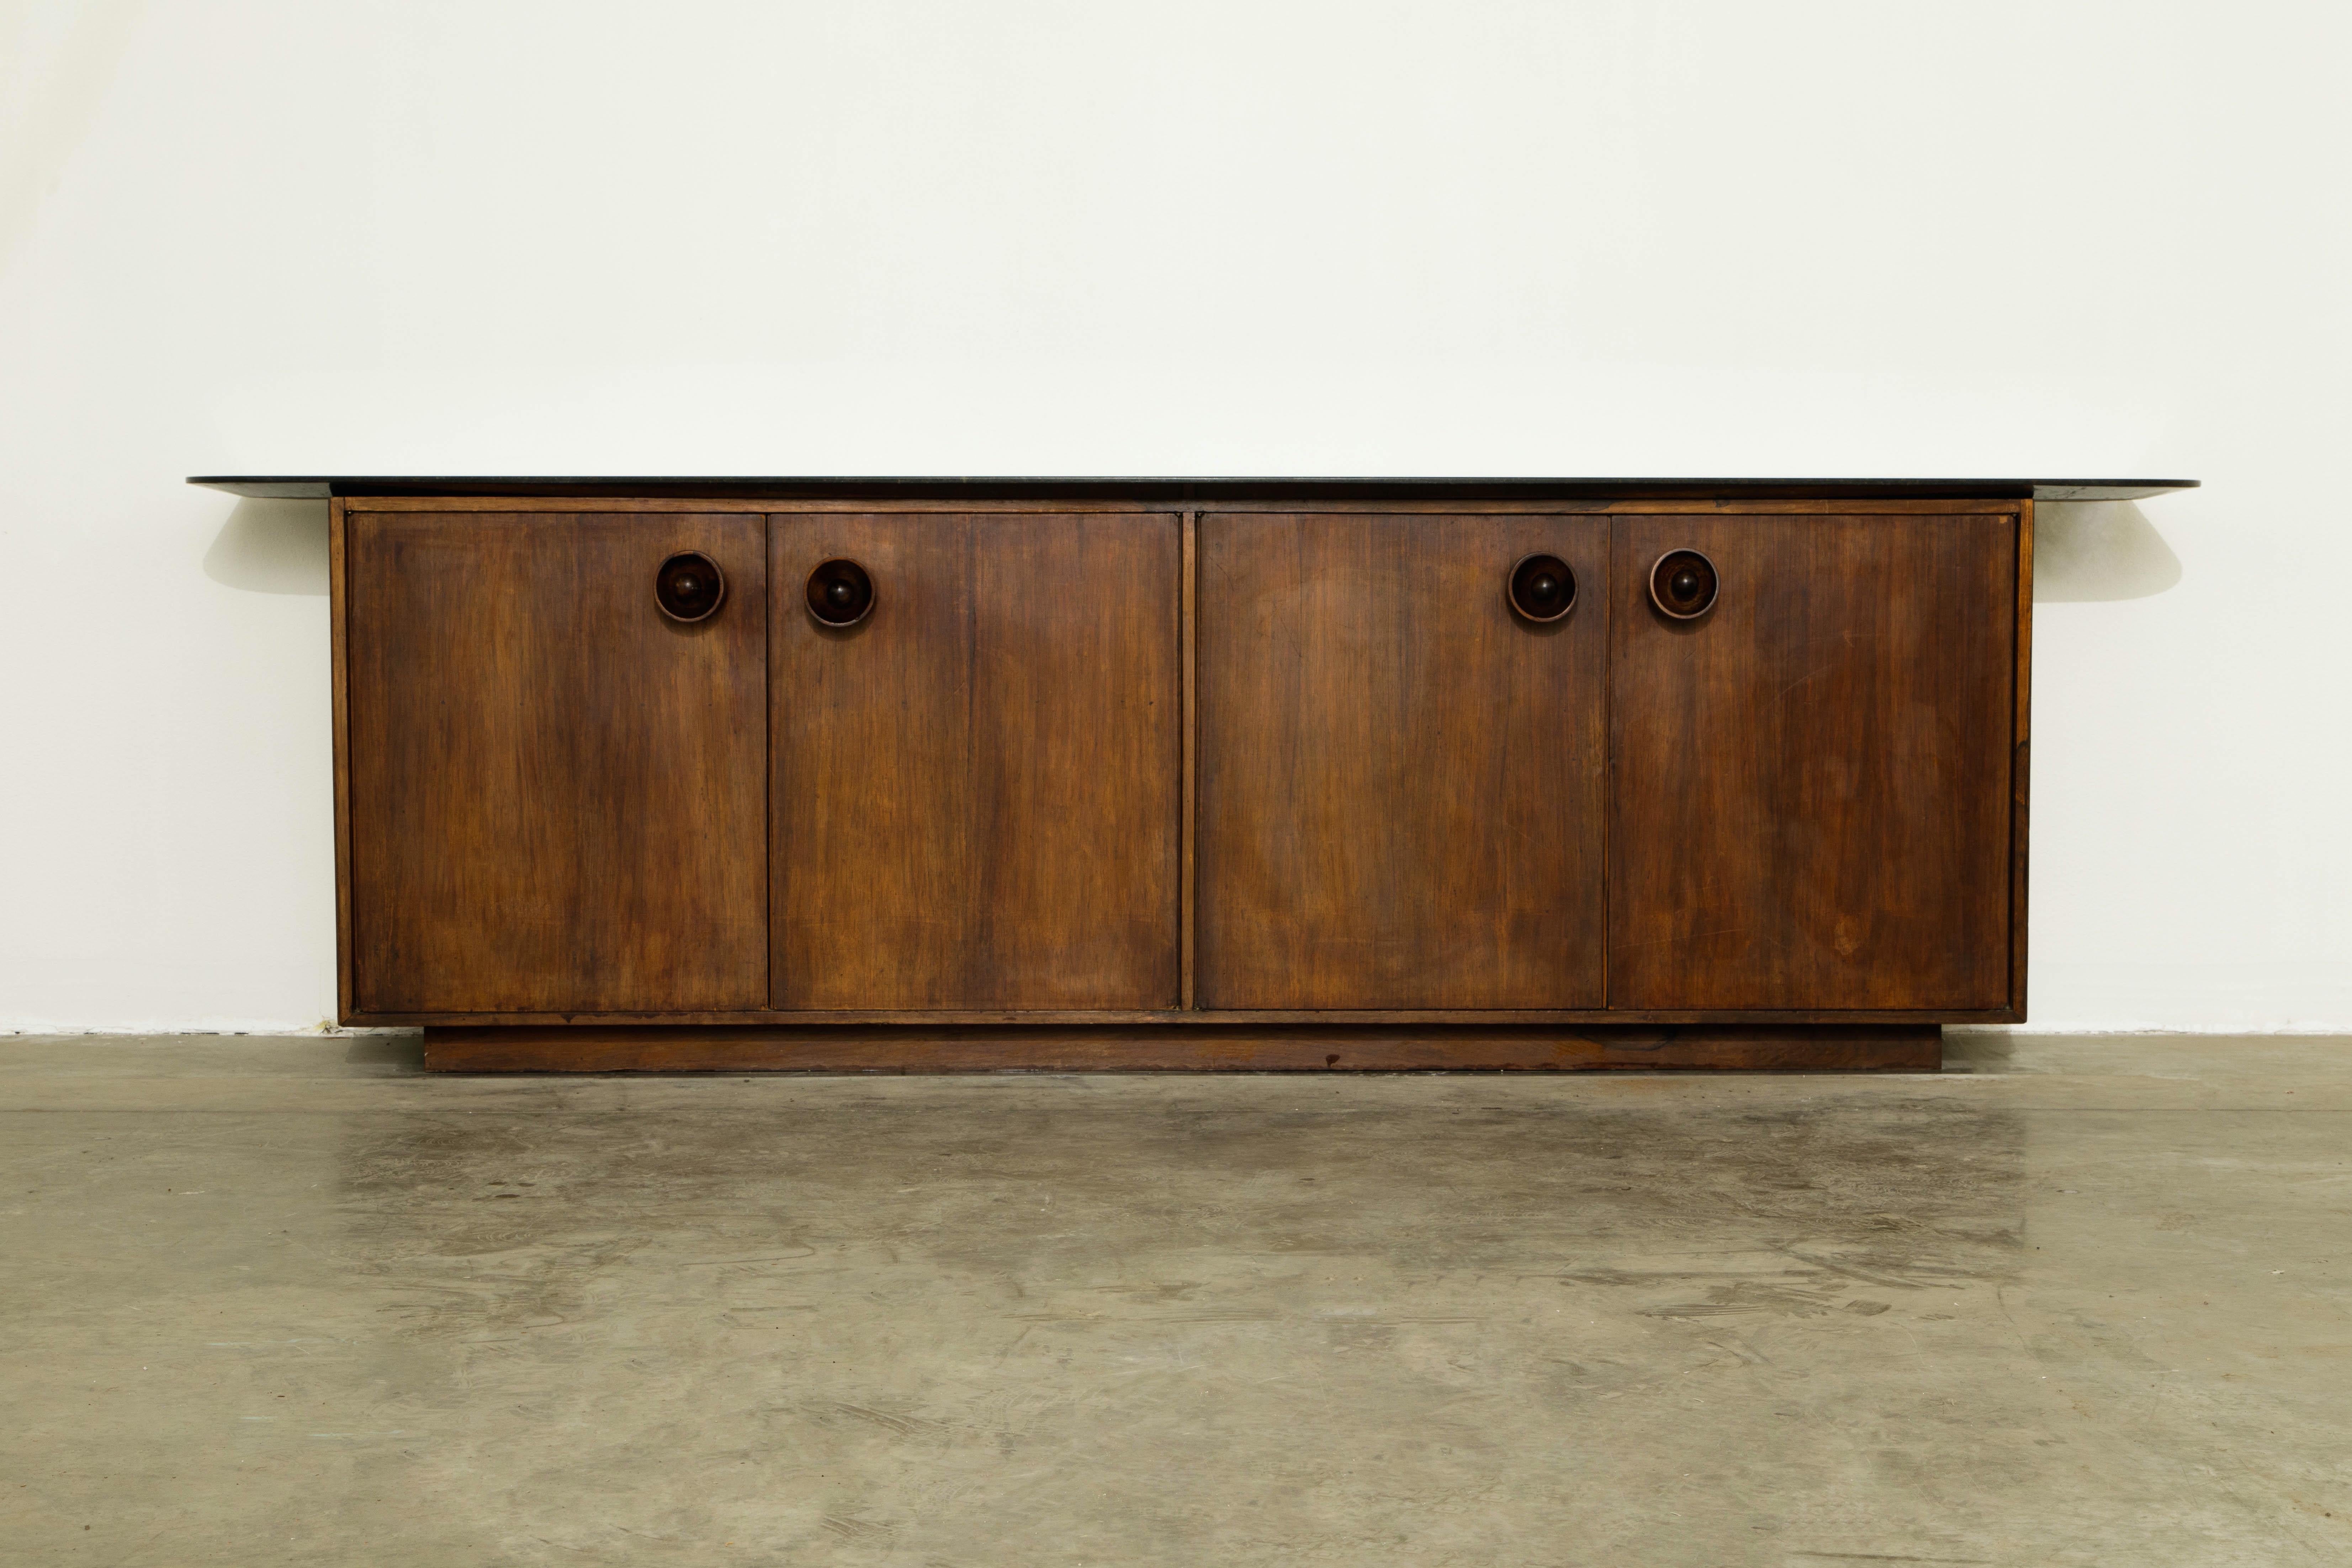 This monumental and important Jacaranda Rosewood sideboard / credenza by Sergio Rodrigues was created with the architect Bernardo Figuiredo for a custom installation in a mid-century modern Rio de Janeiro home in Brazil in which we acquired it from.